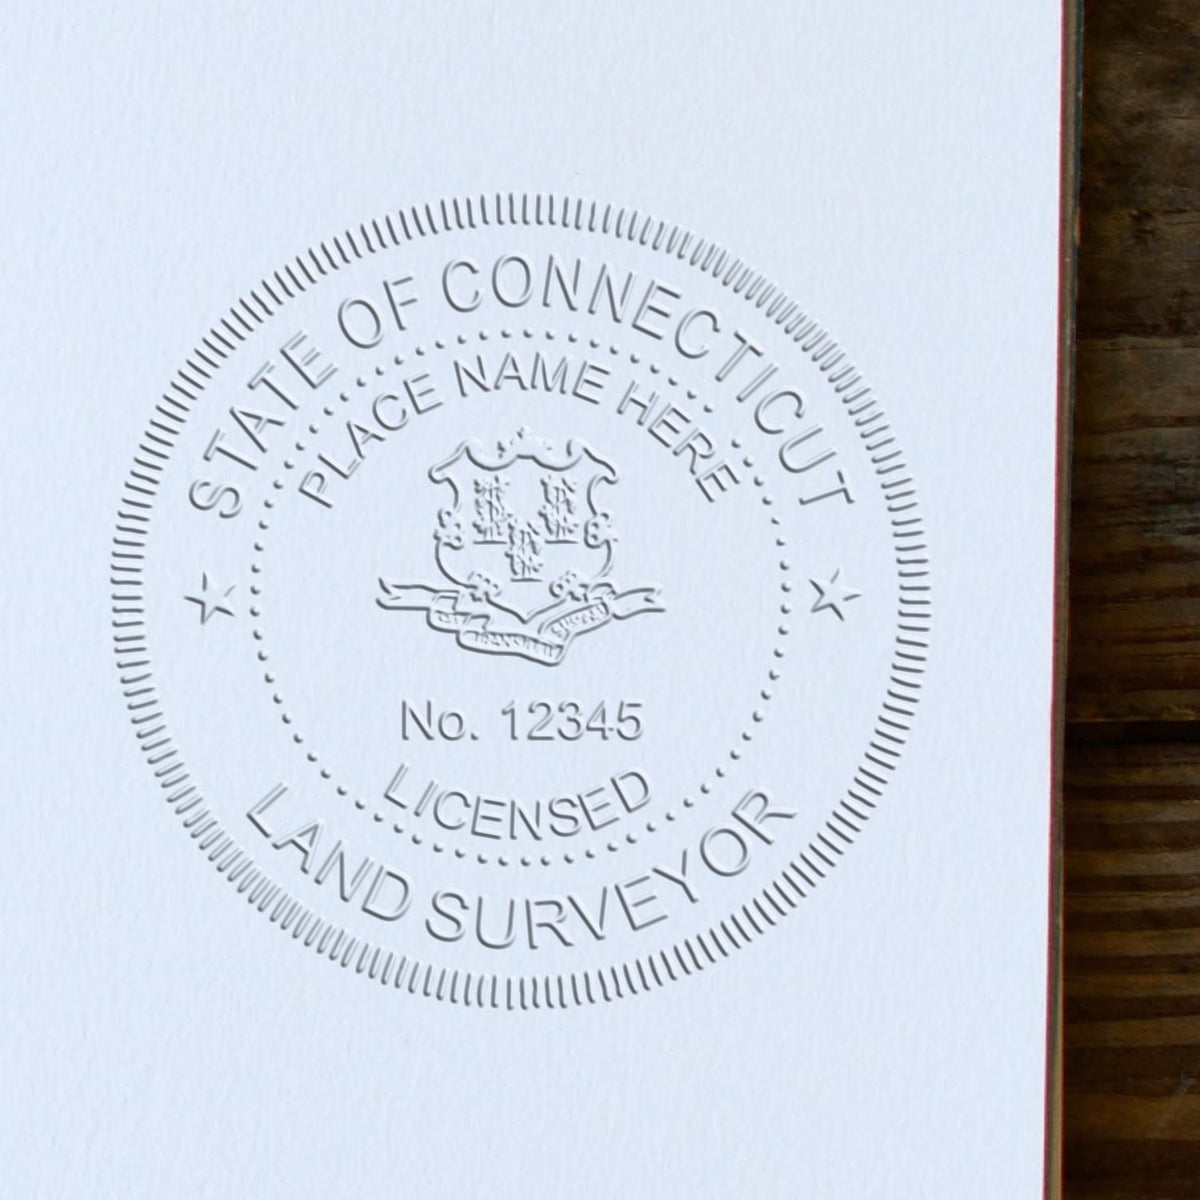 The Gift Connecticut Land Surveyor Seal stamp impression comes to life with a crisp, detailed image stamped on paper - showcasing true professional quality.